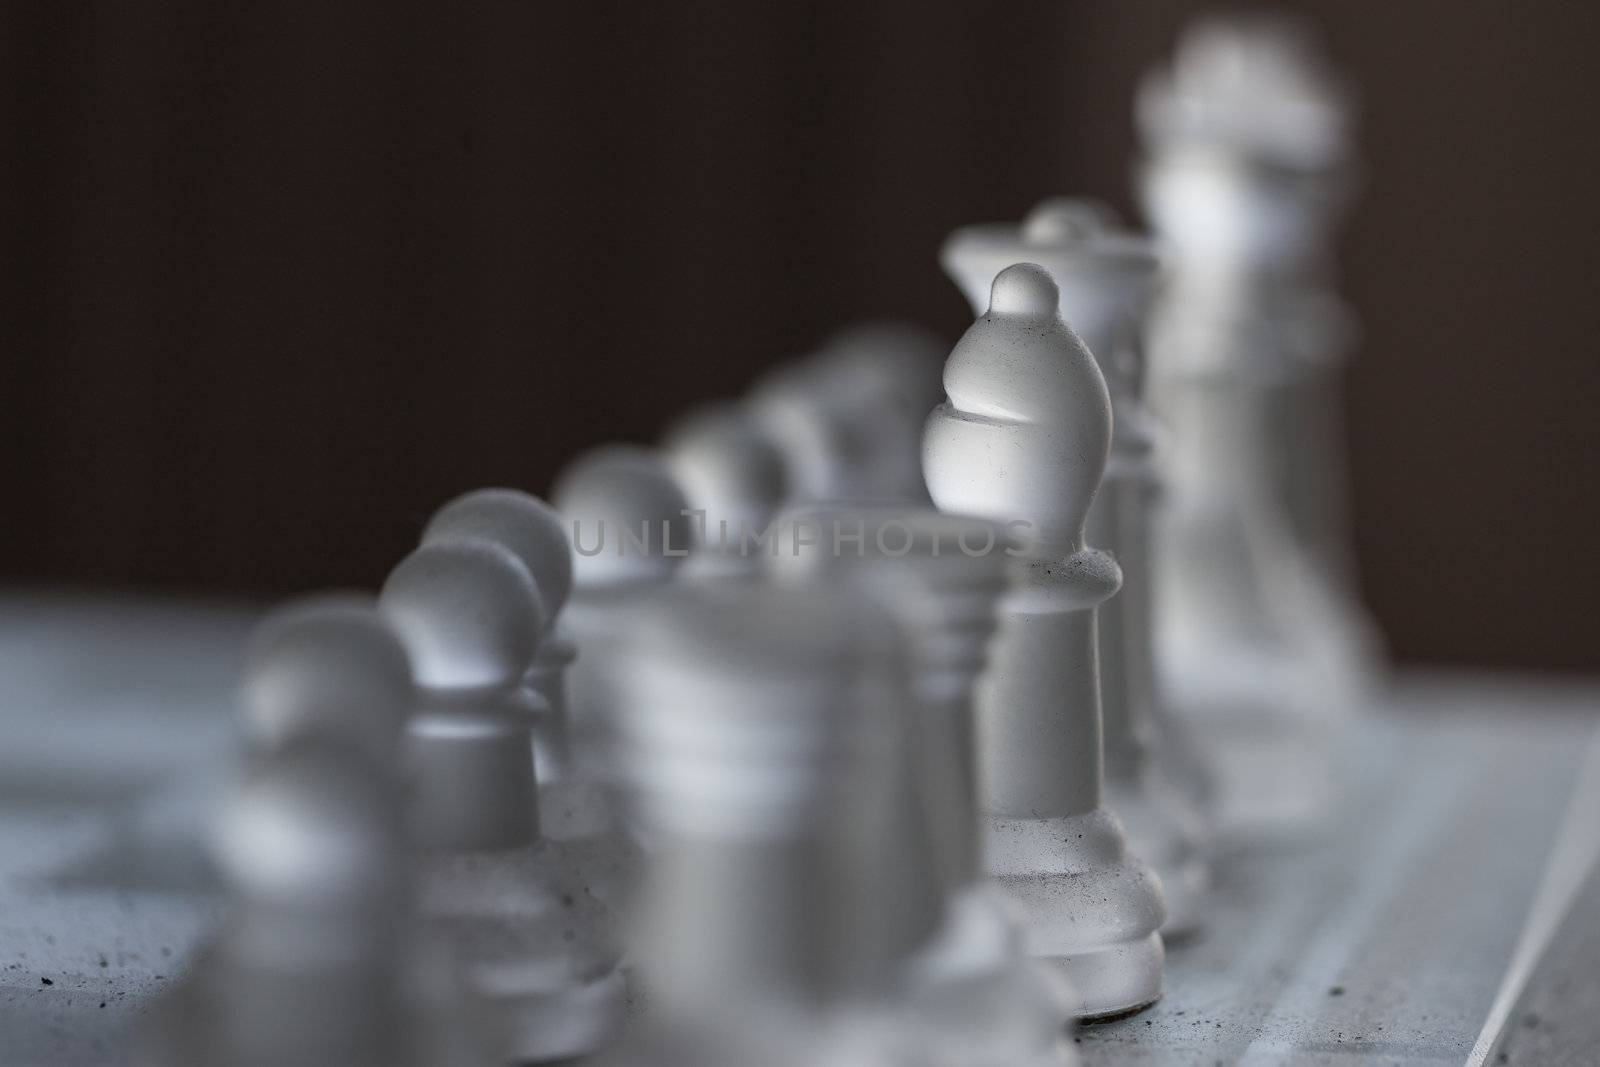 dusty chess figures that look abandoned